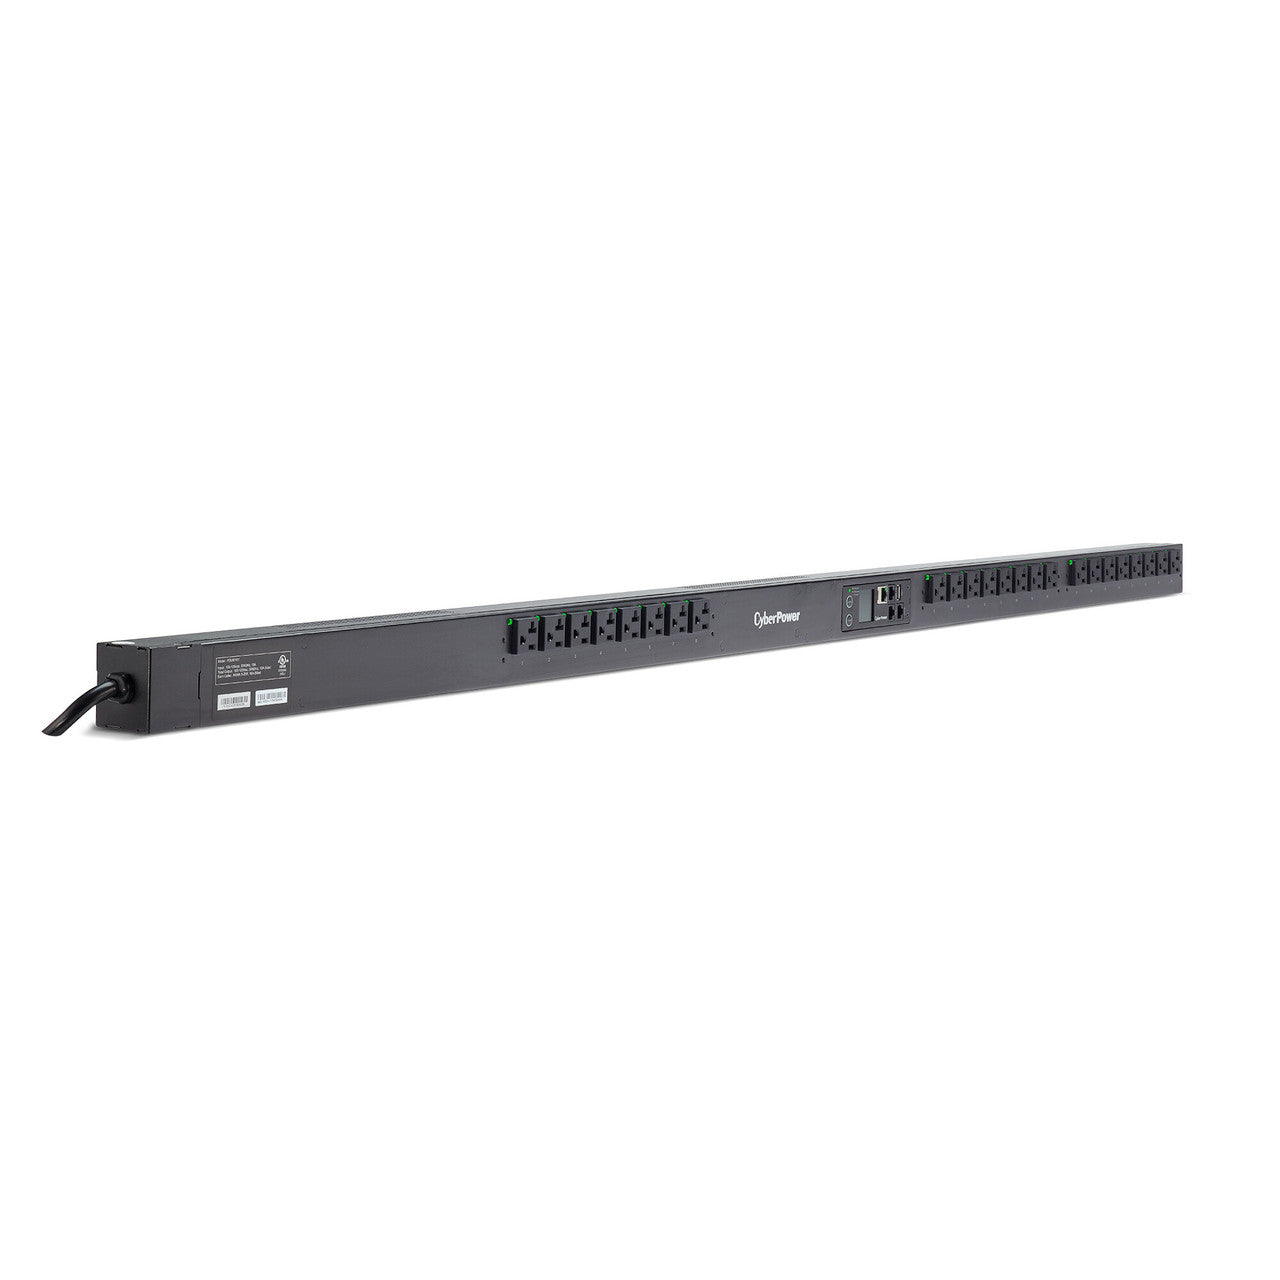 CyberPower PDU81101 Metered-by-Outlet Switched PDU 20A 120V (L)5-20P Input (24) NEMA 5-20R Output 10ft Cord 0U 3yr Wty